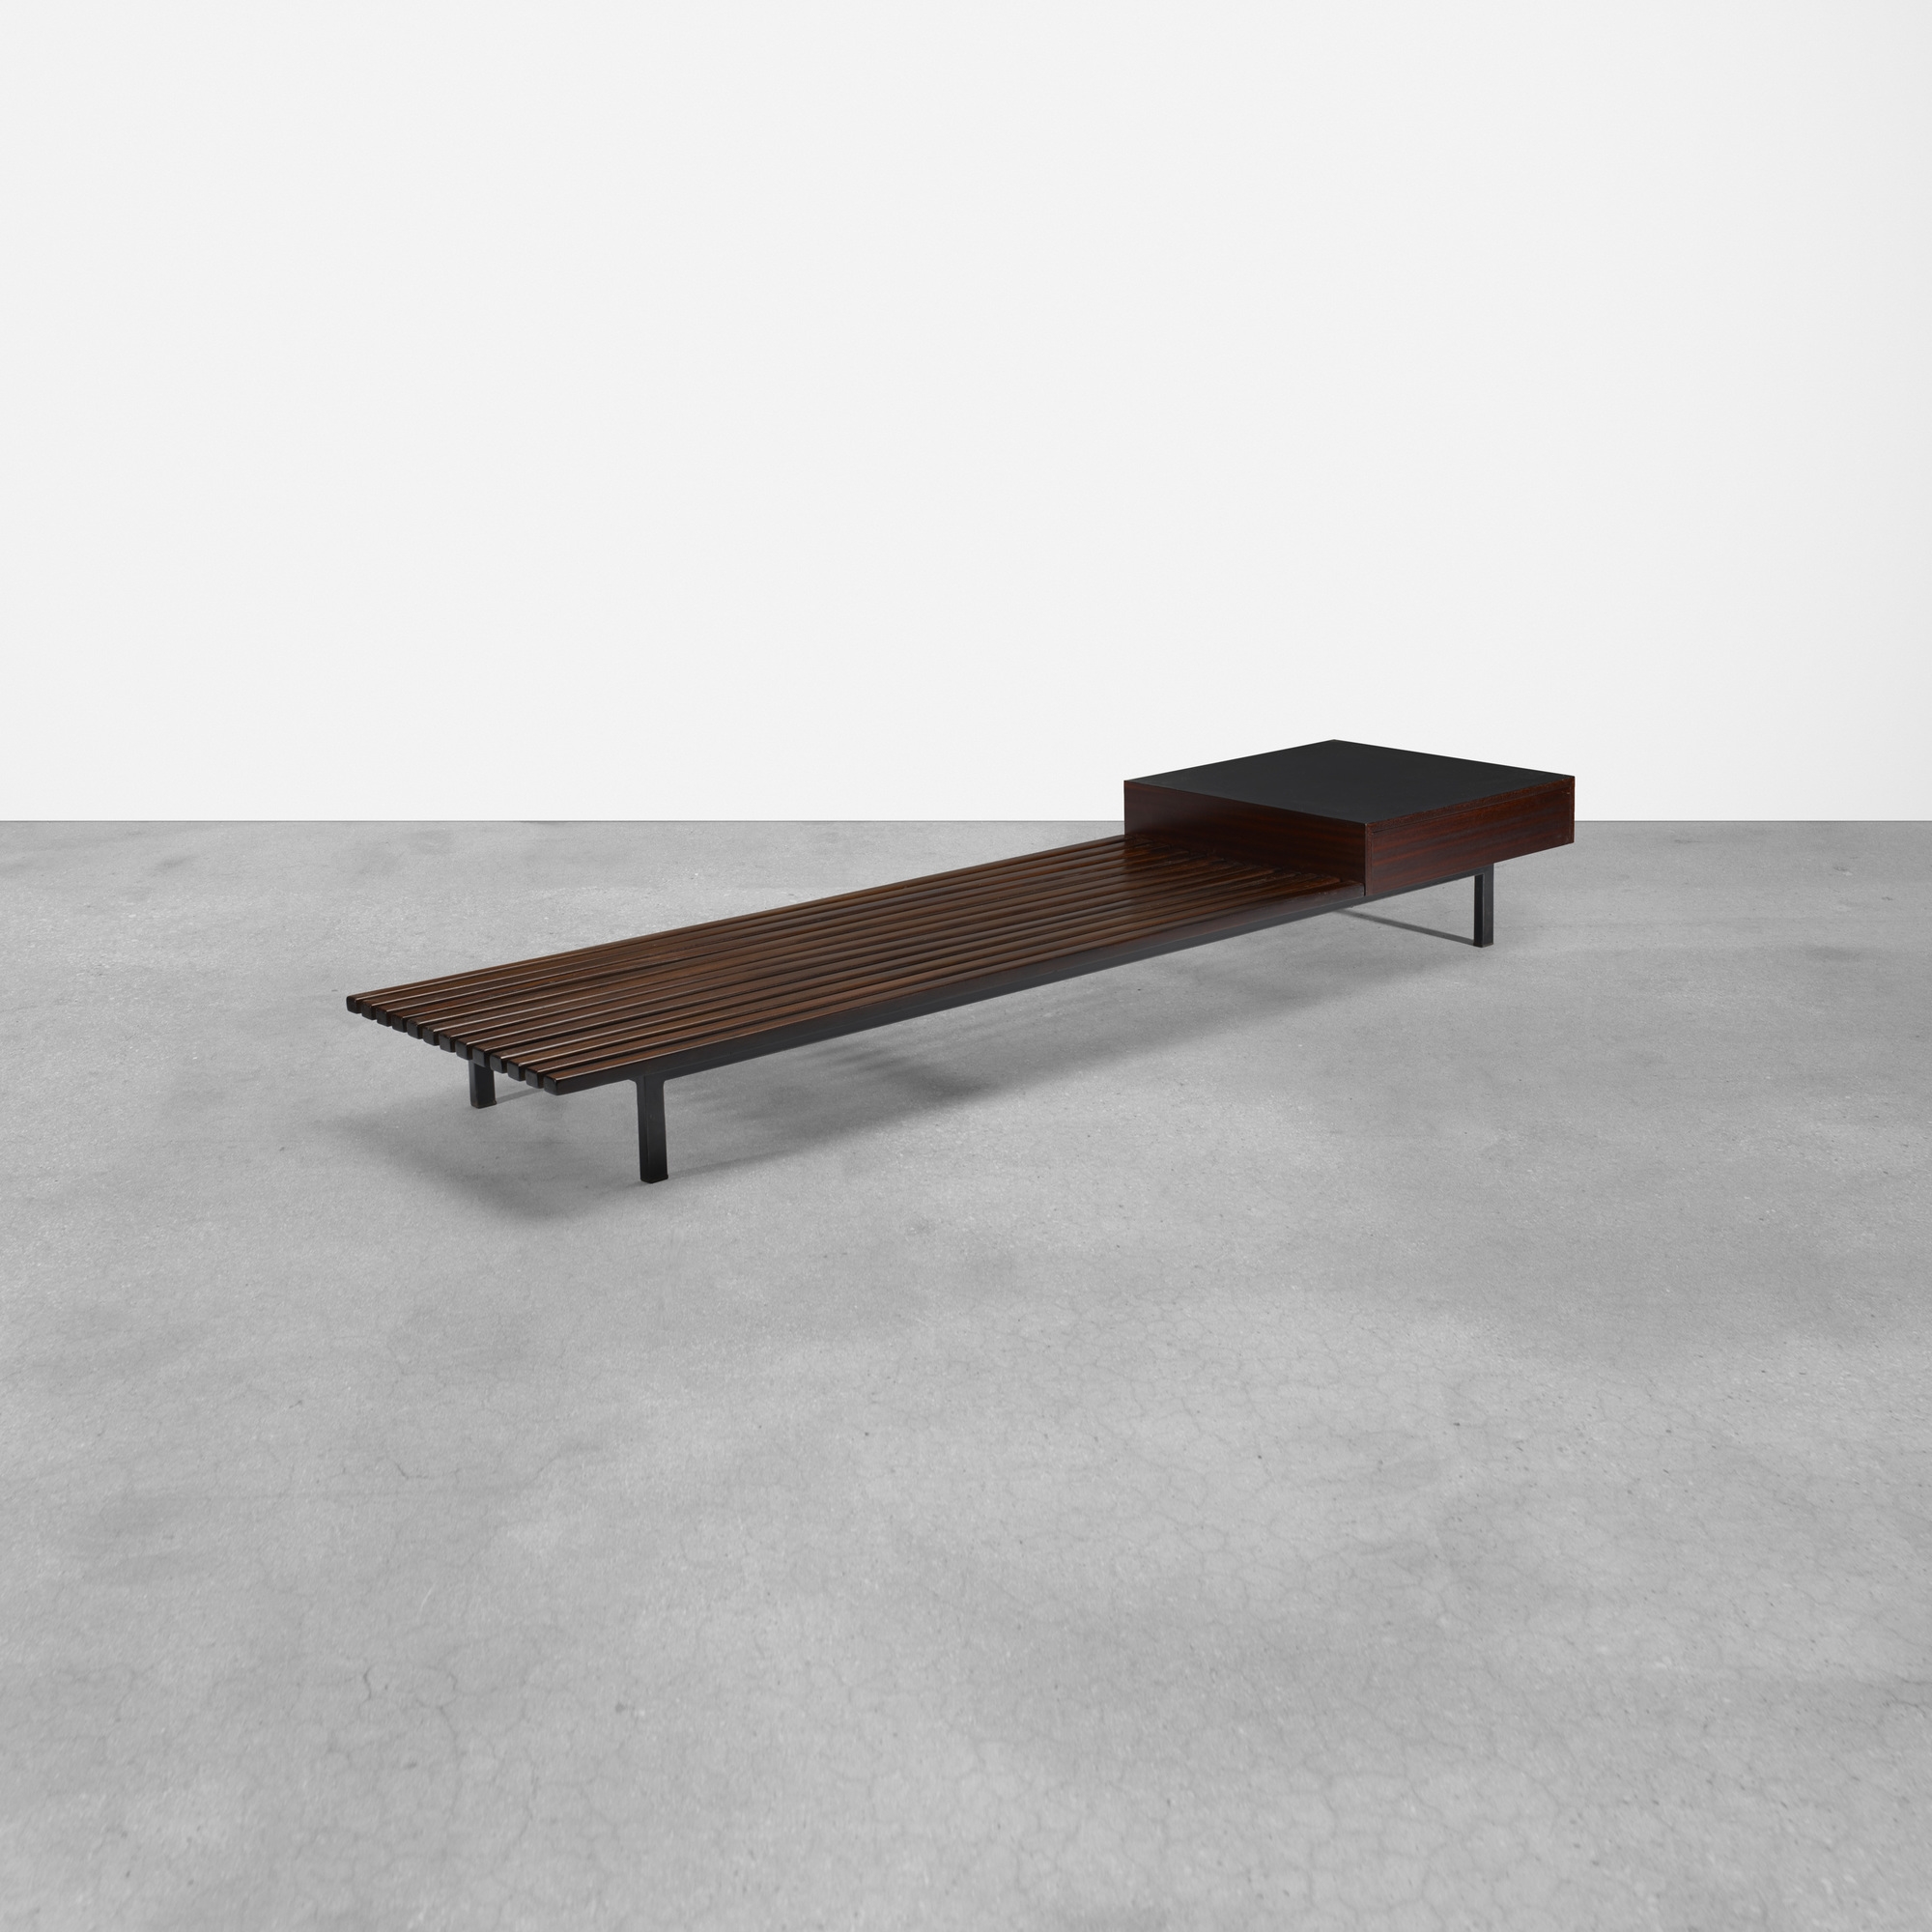 Charlotte Perriand, Bench with drawer, from Cité Cansado, Mauritania  (circa 1962)